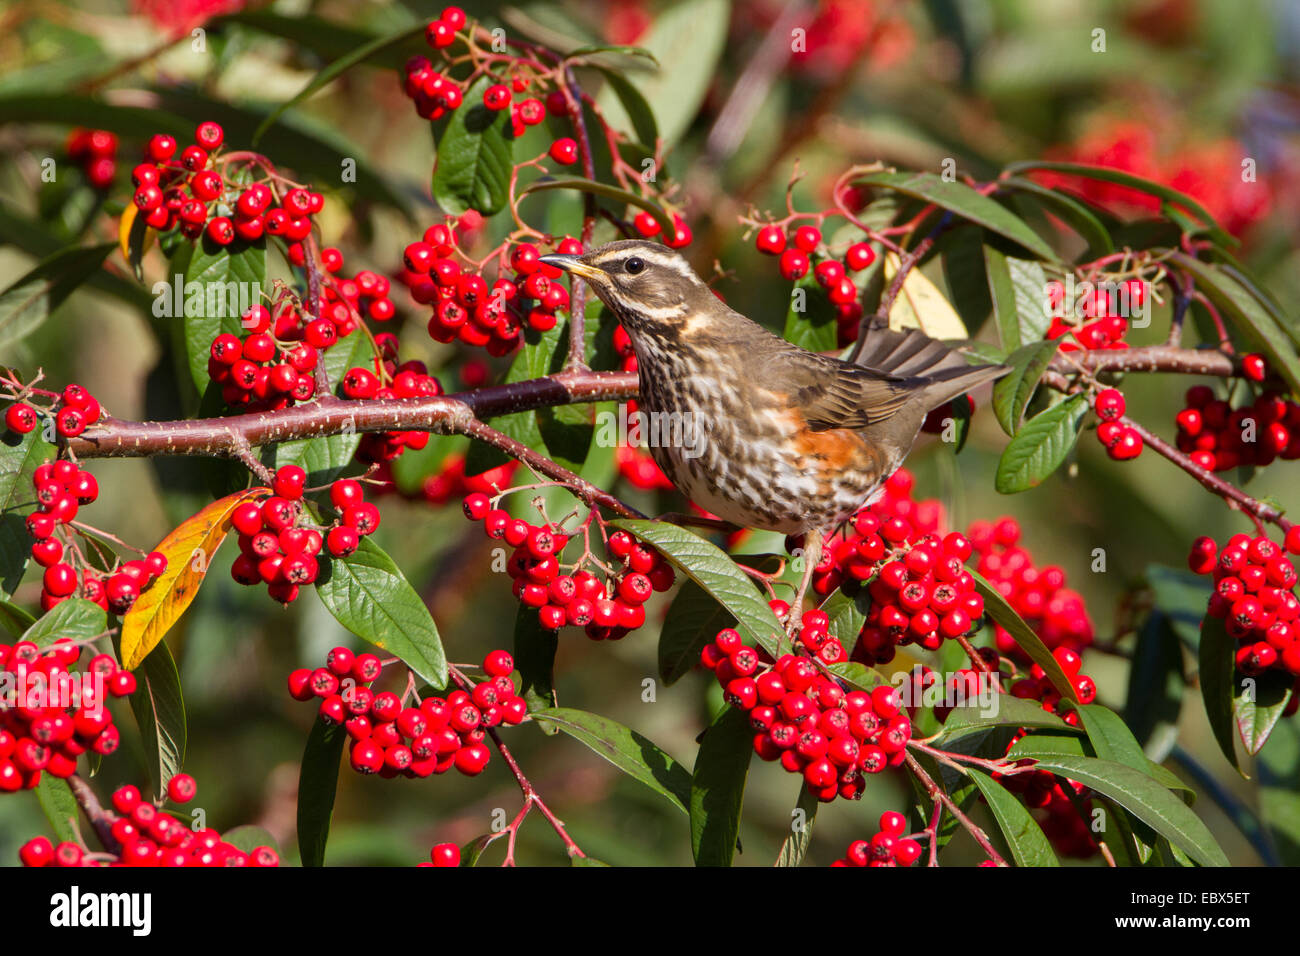 Redwing (Turdus iliacus) feeding from a cotoneaster hedge full of red berries, in Worcestershire, England, UK. Stock Photo